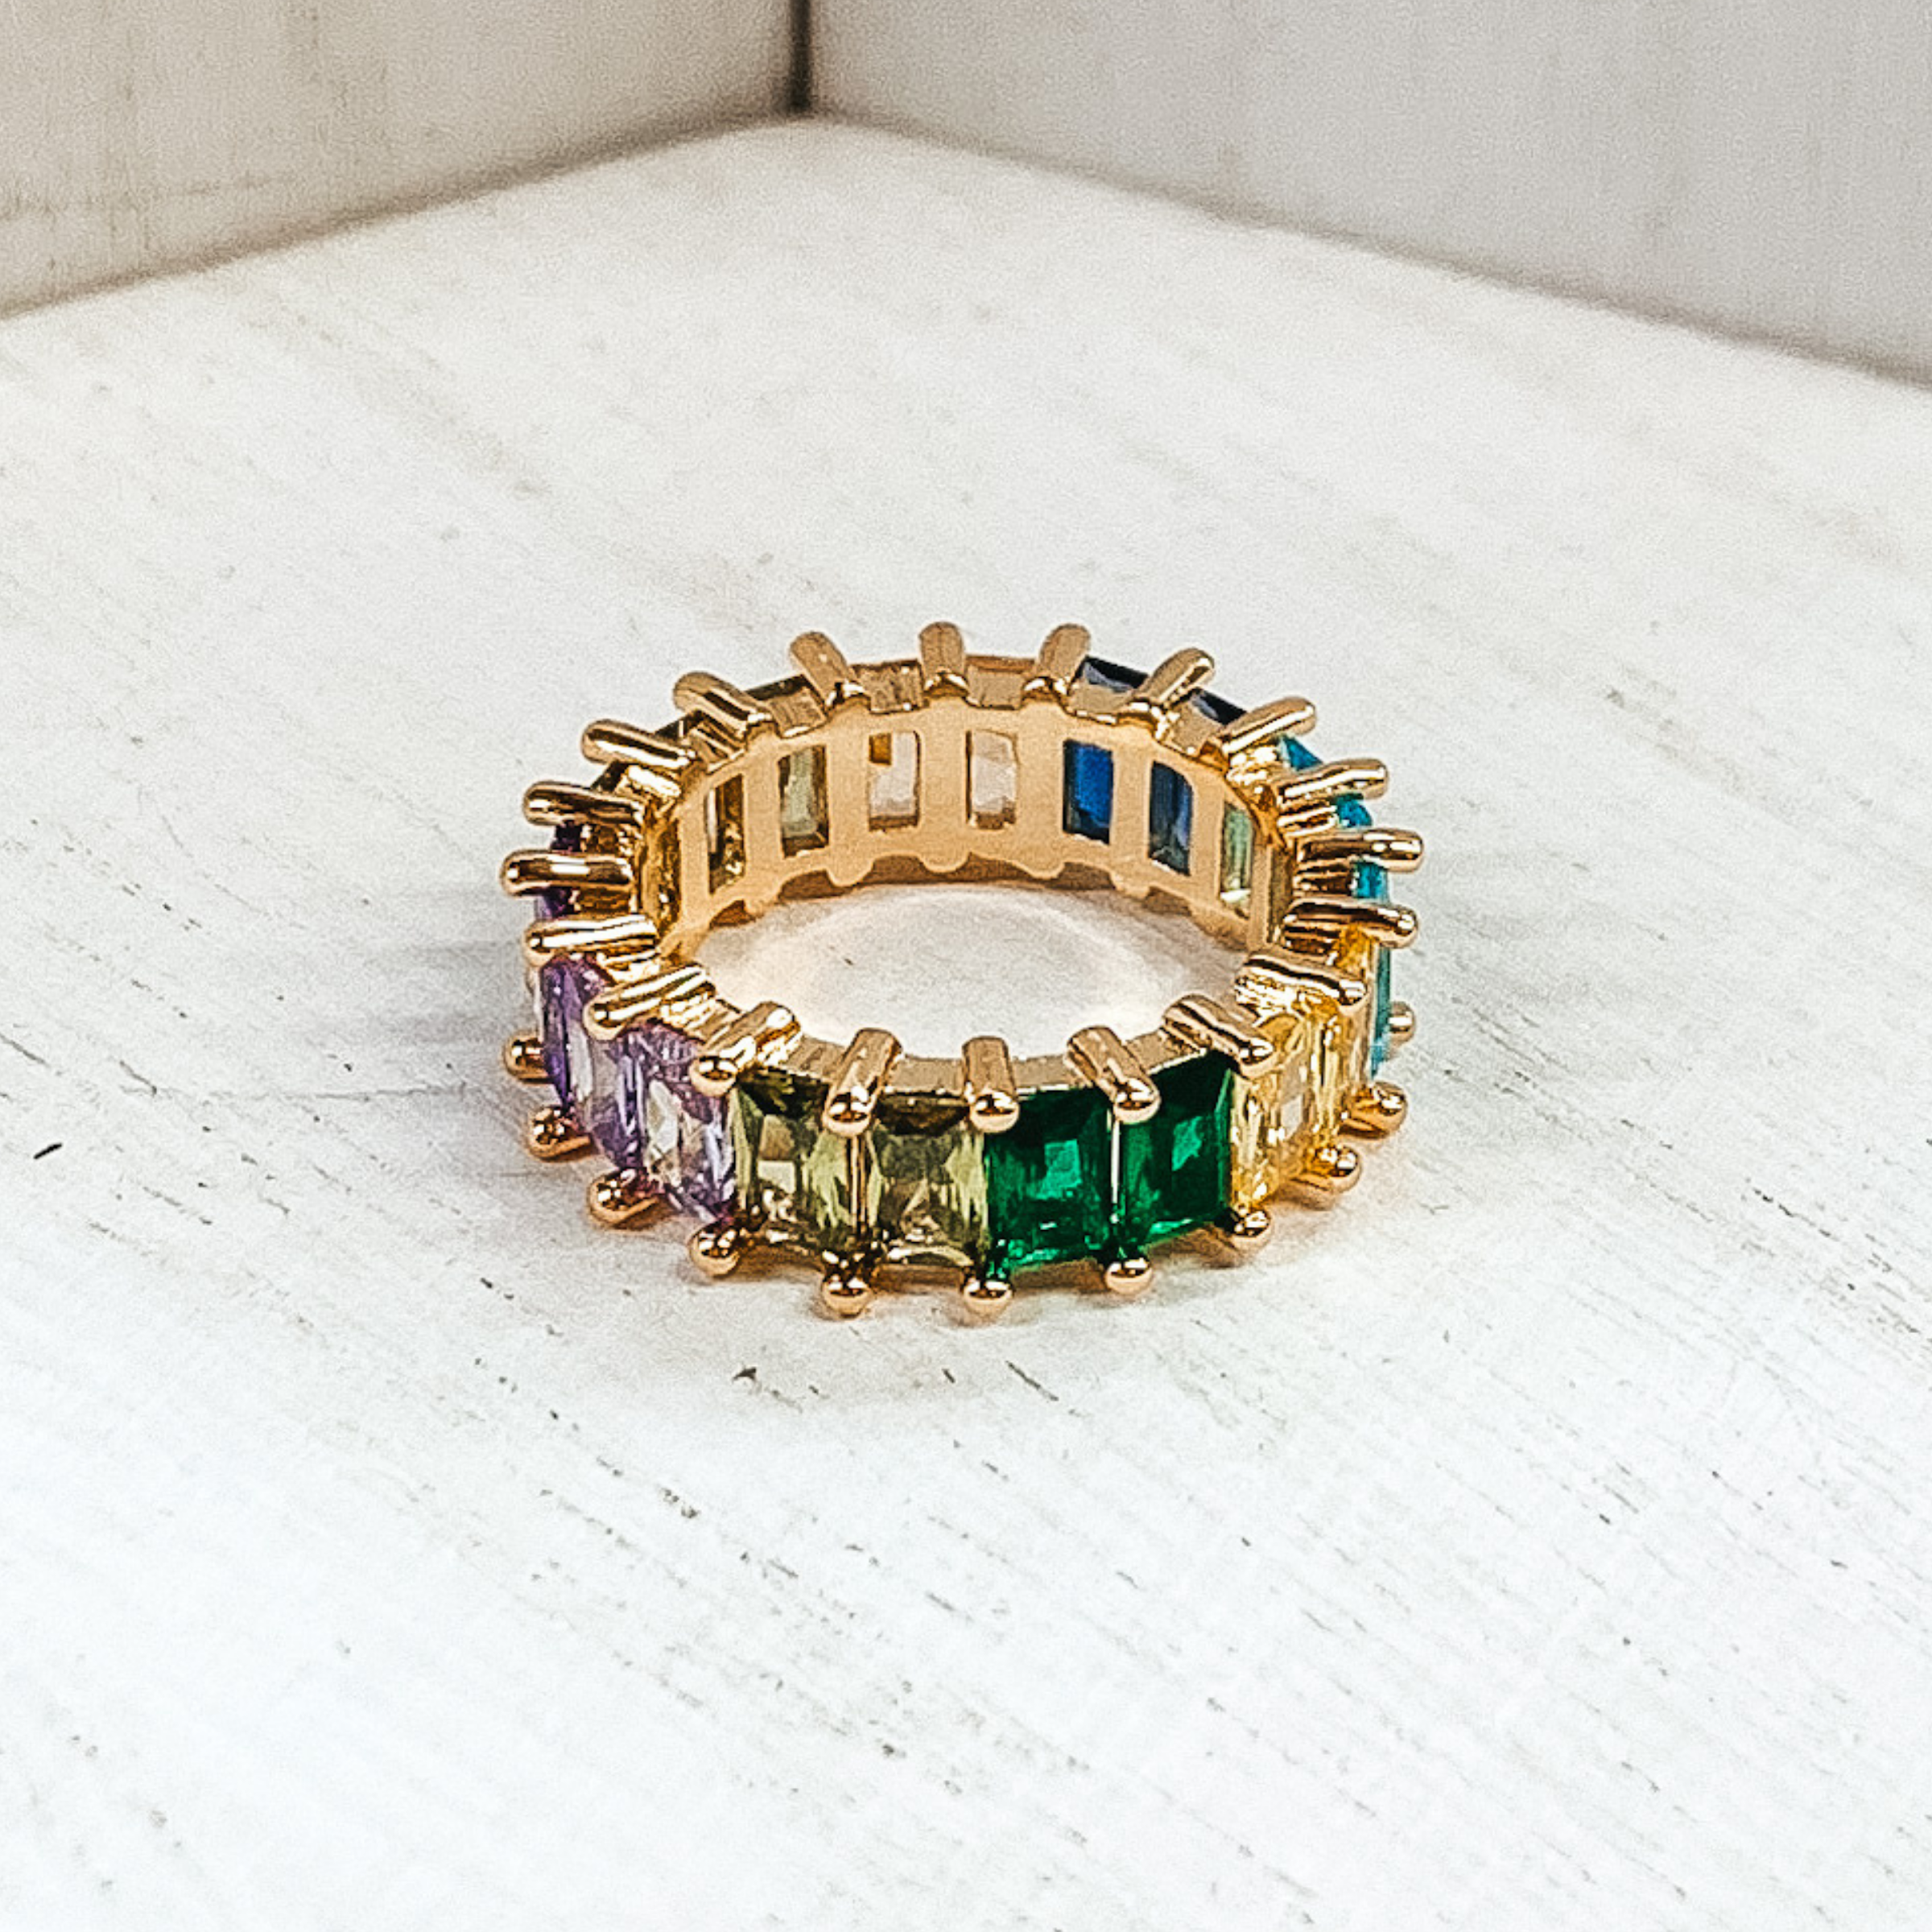 Gold Tone Ring with Baguette Crystals in Blue Multicolored - Giddy Up Glamour Boutique